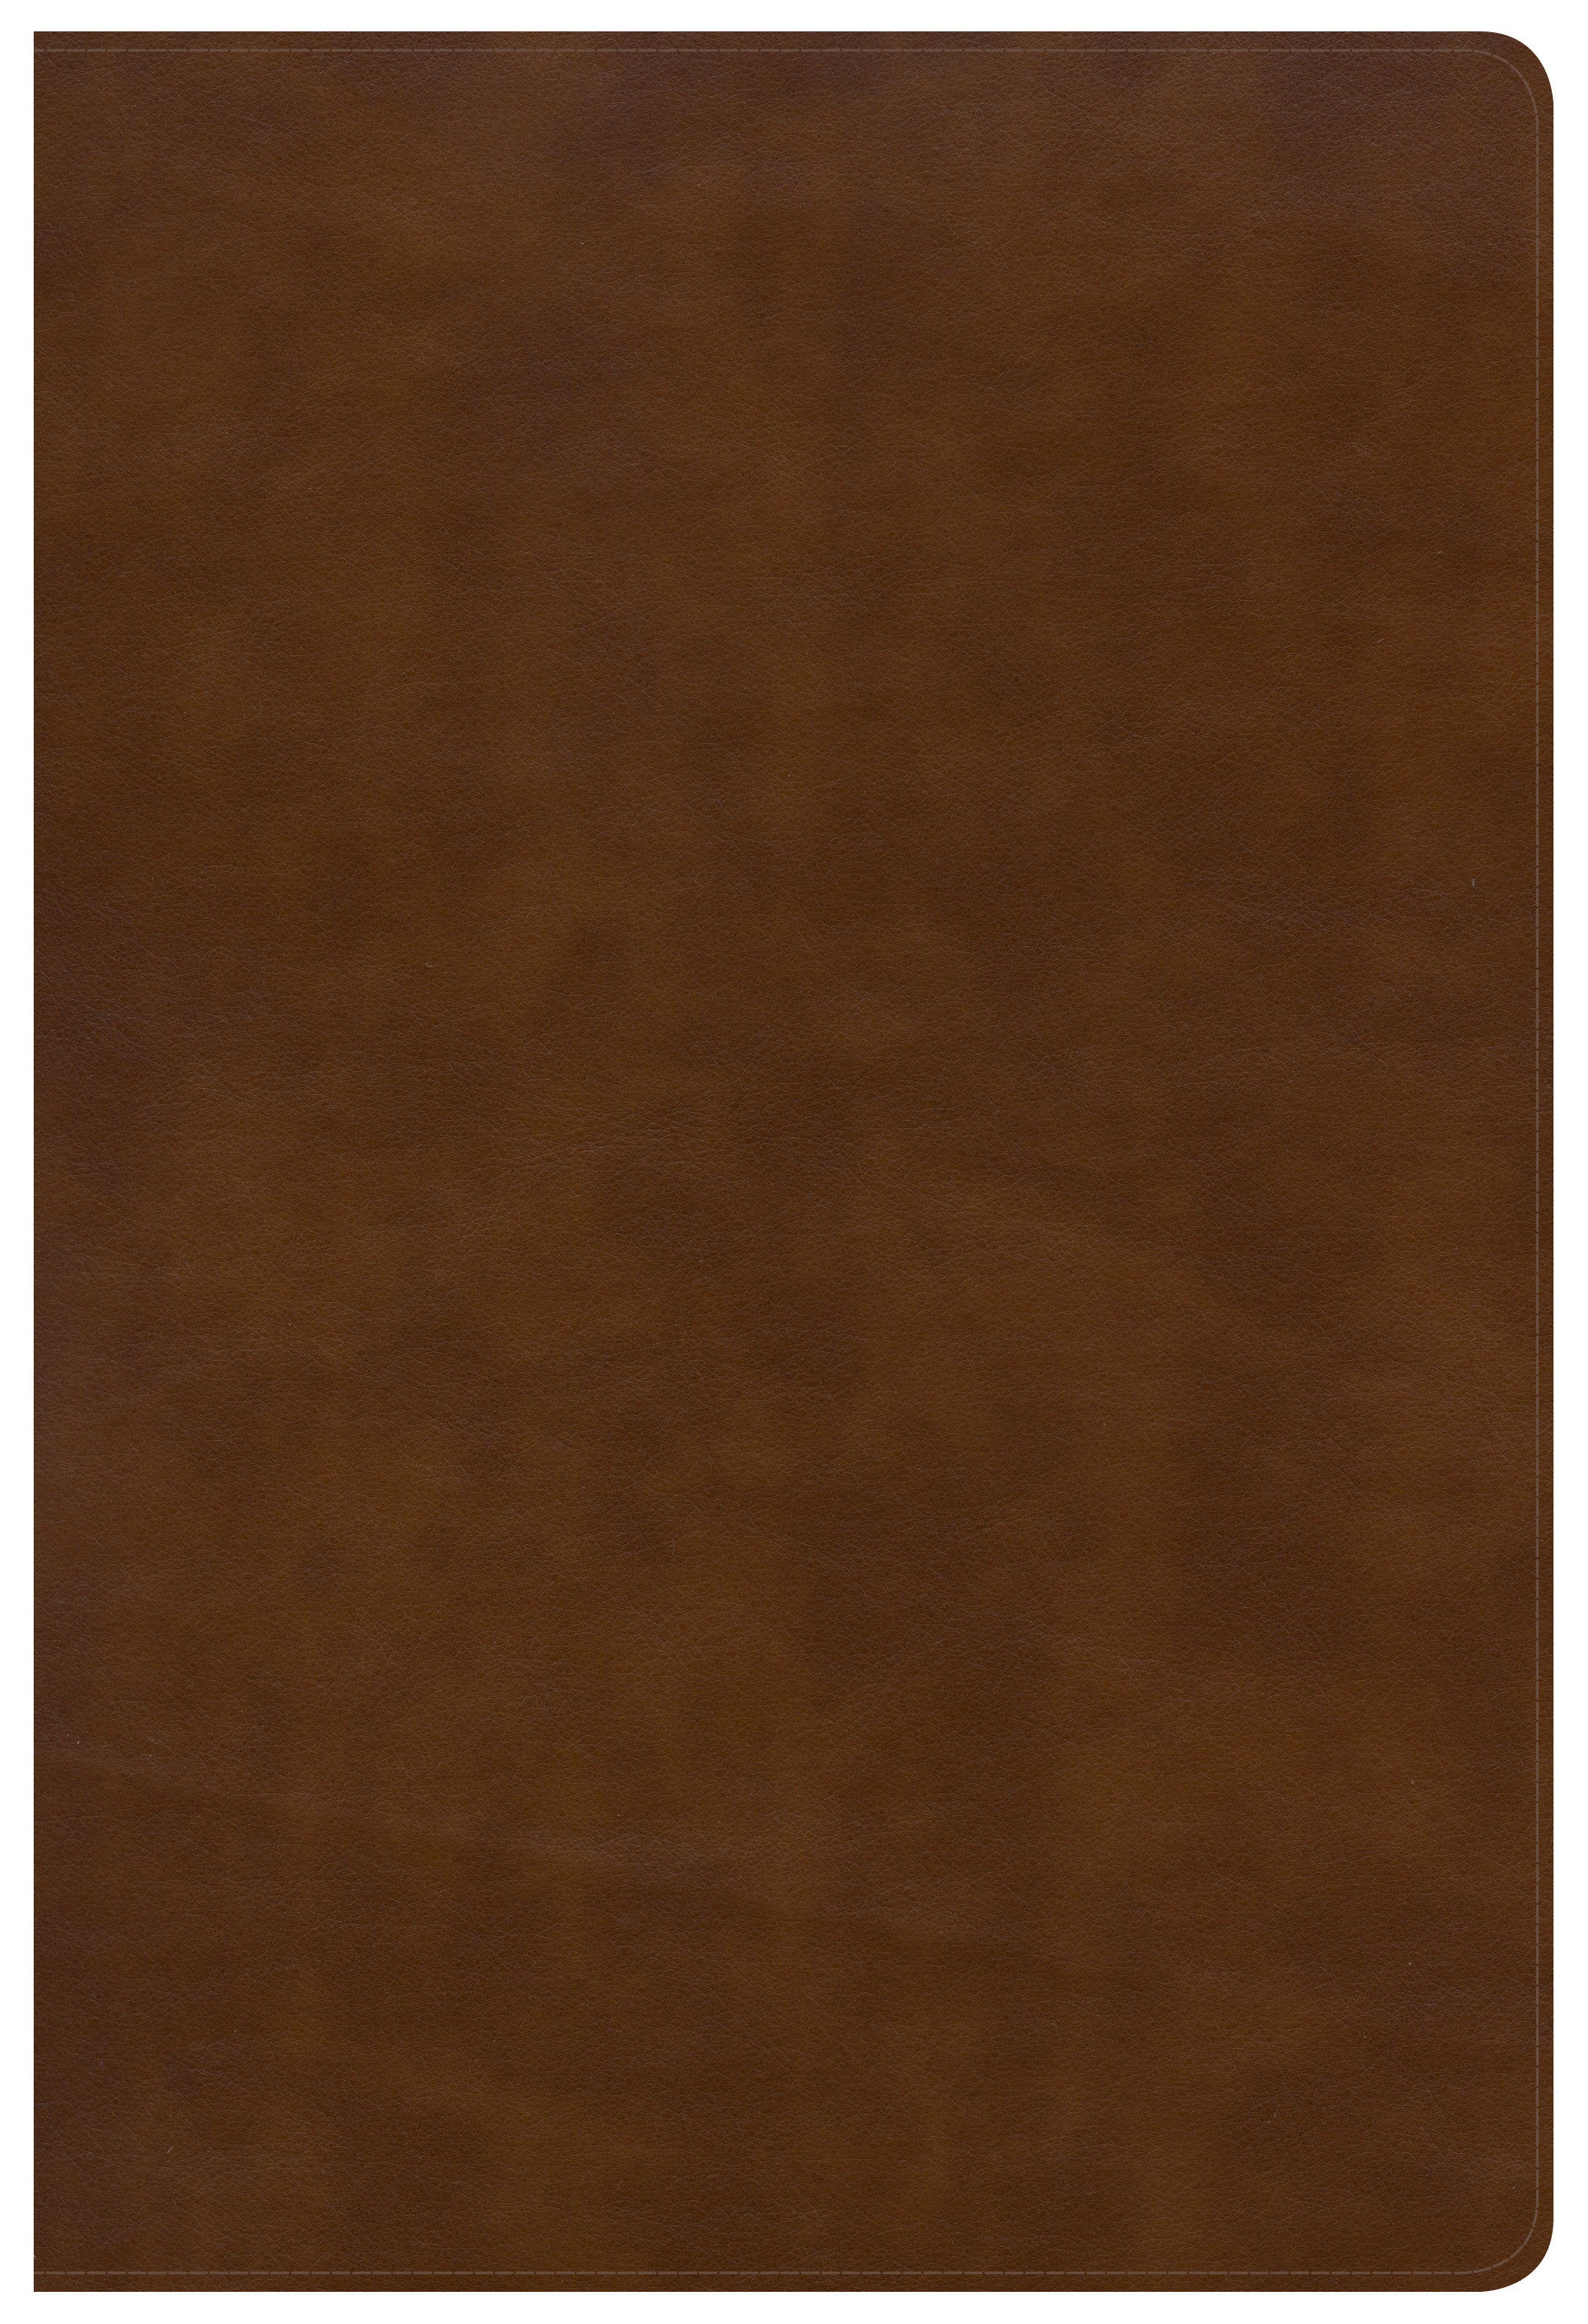 Image of NKJV Large Print Ultrathin Reference Bible, British Tan Leat other